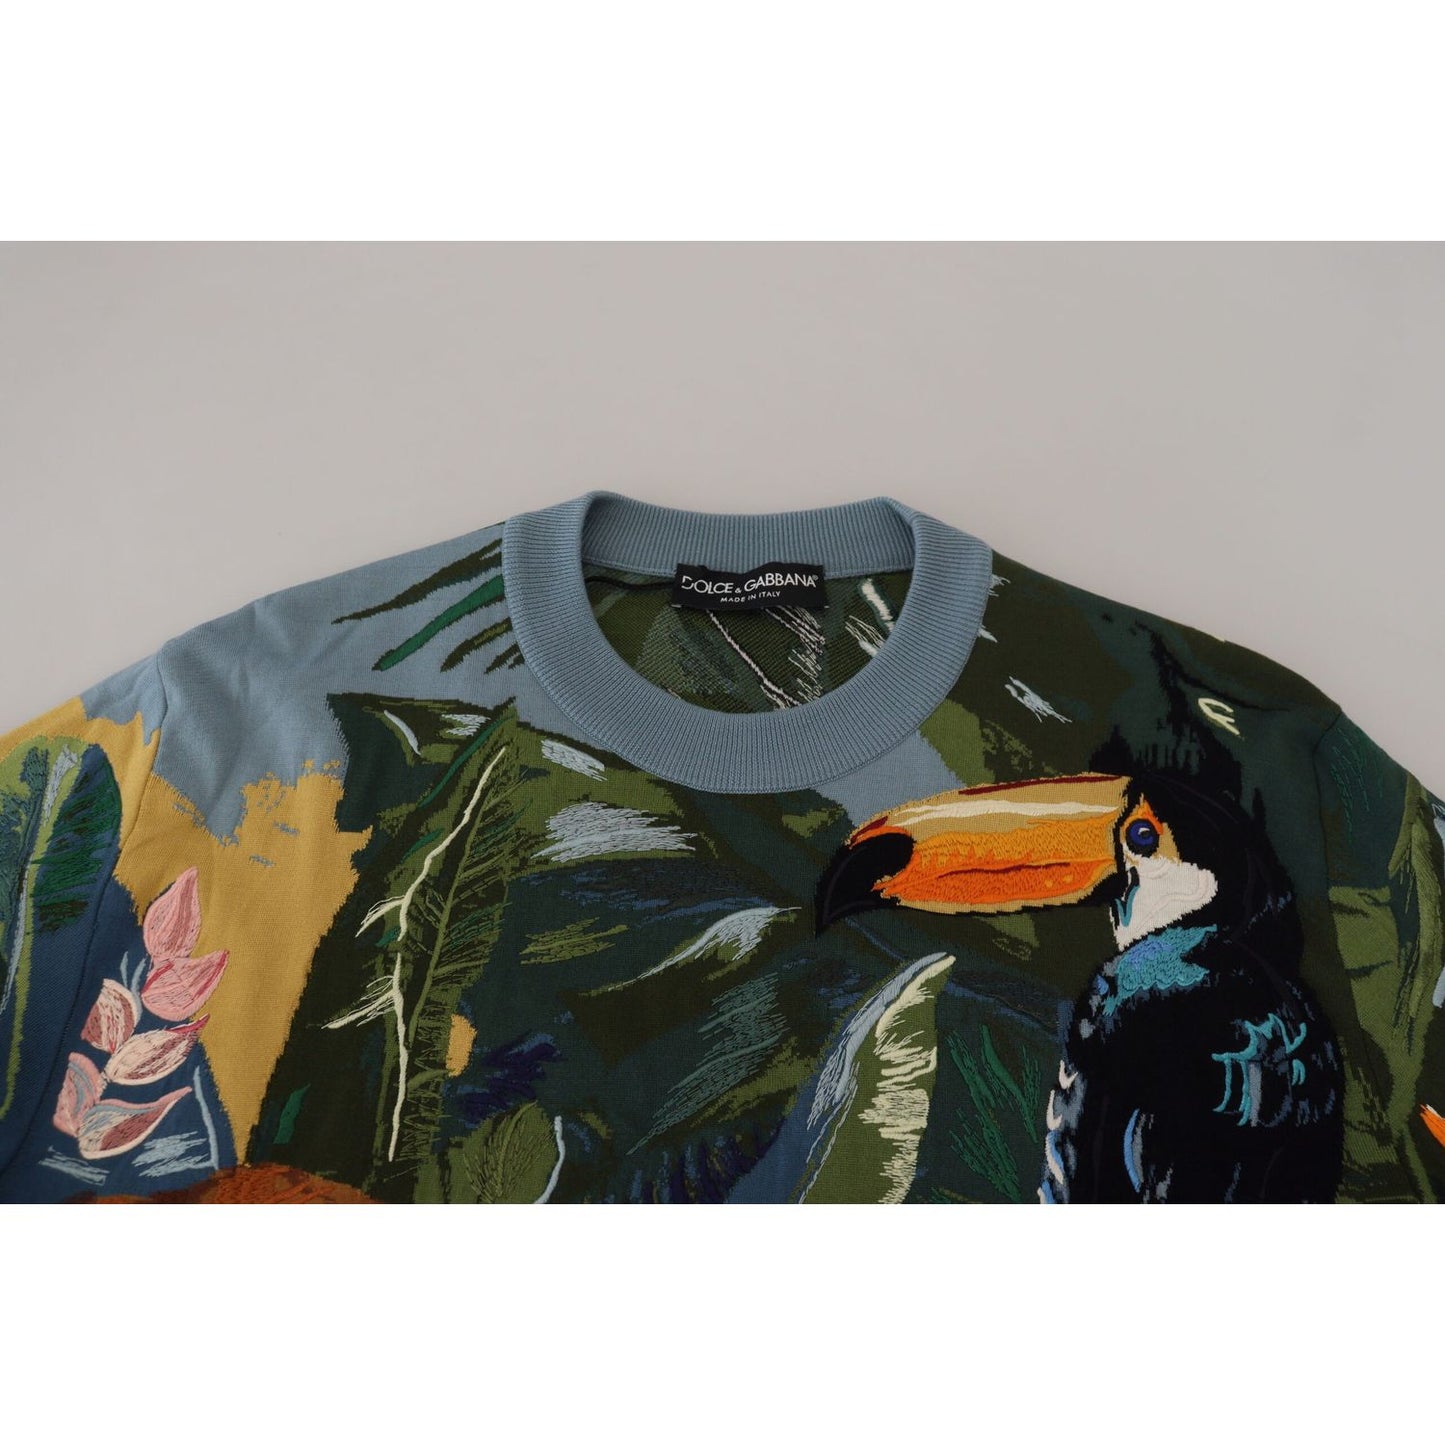 Dolce & Gabbana Jungle Embroidered Wool Silk Sweater multicolor-jungle-wool-pullover-logo-sweater